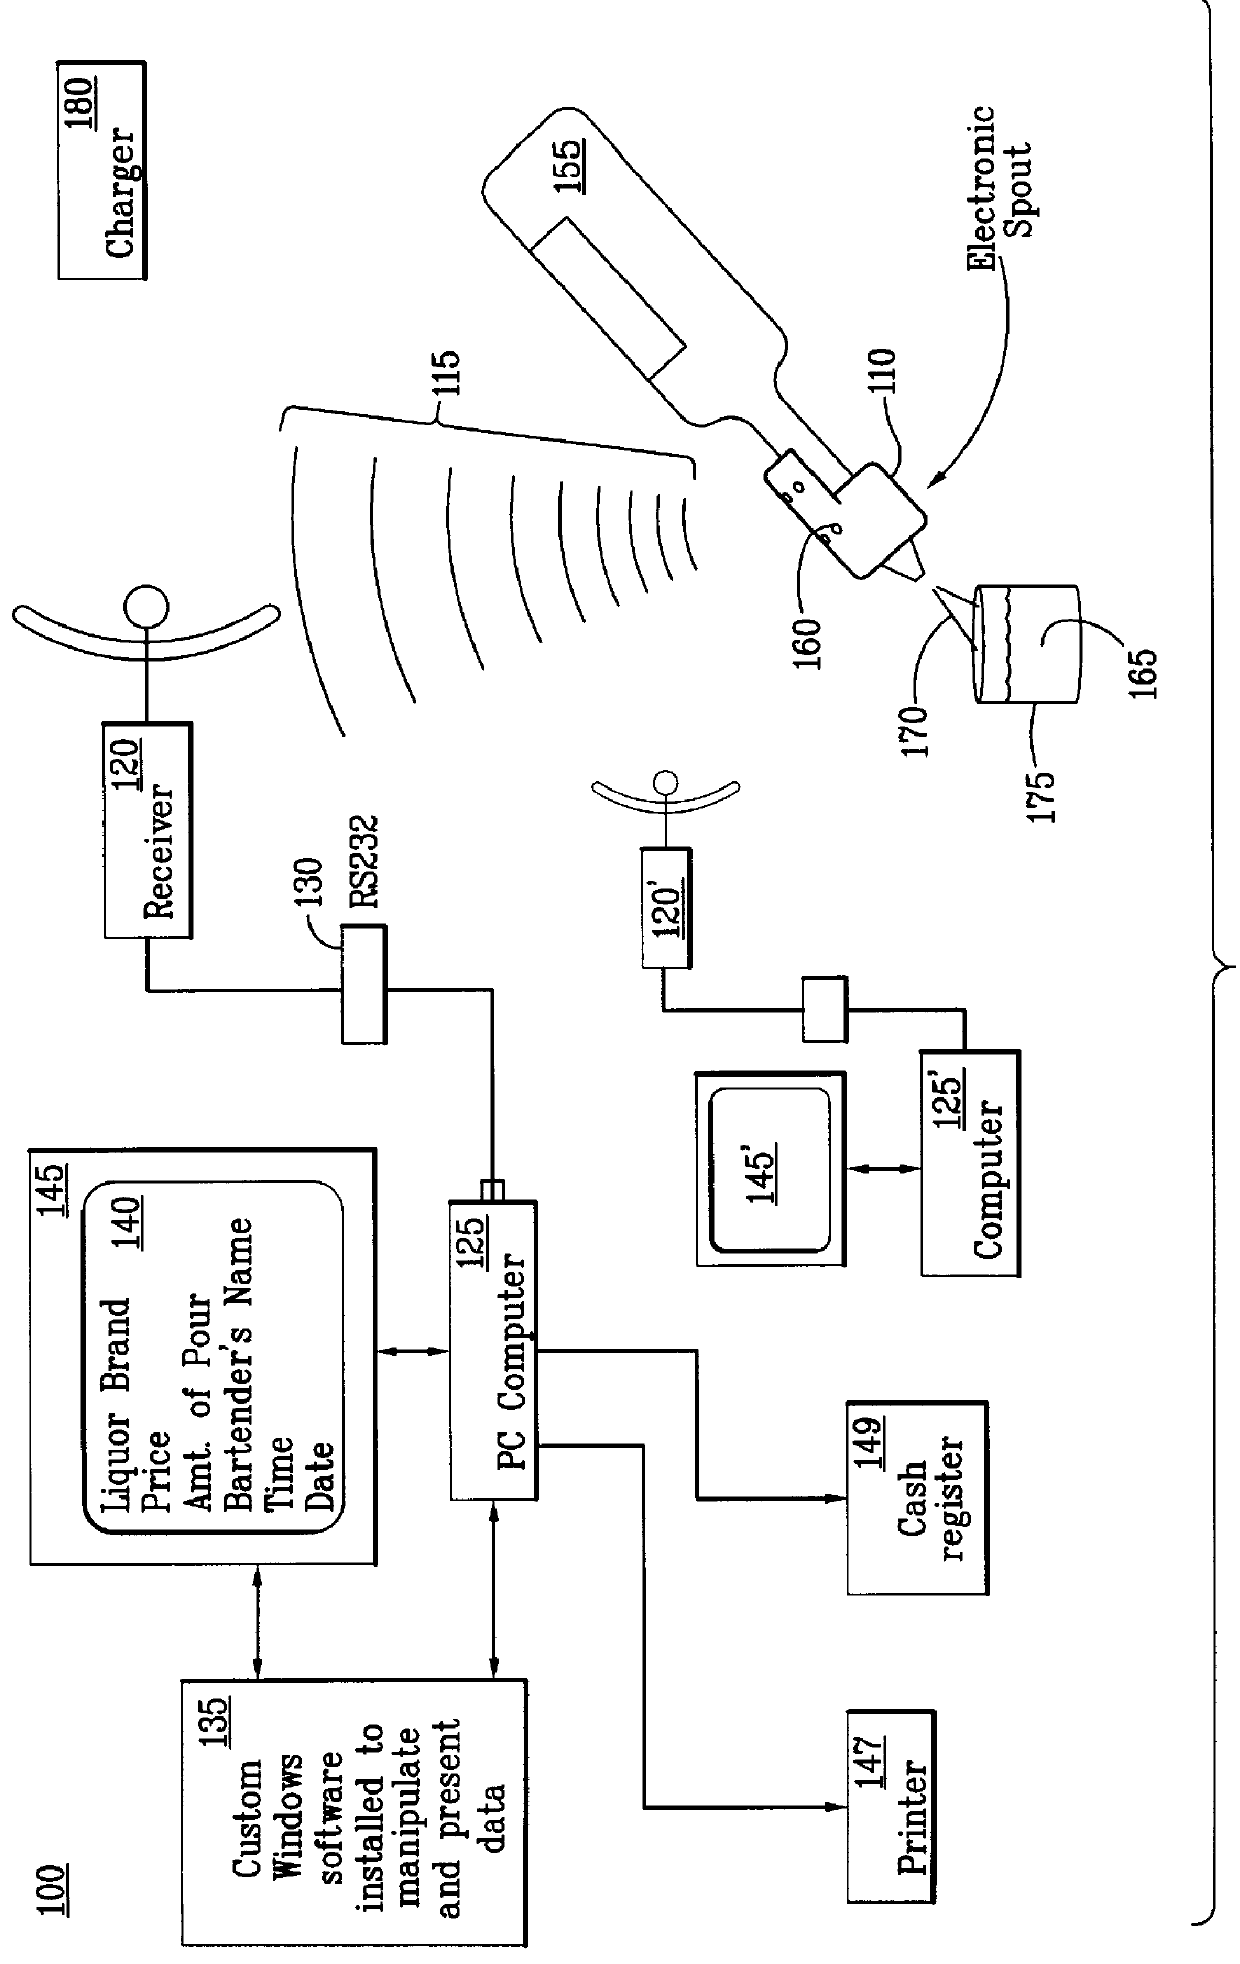 Wireless liquid portion and inventory control system